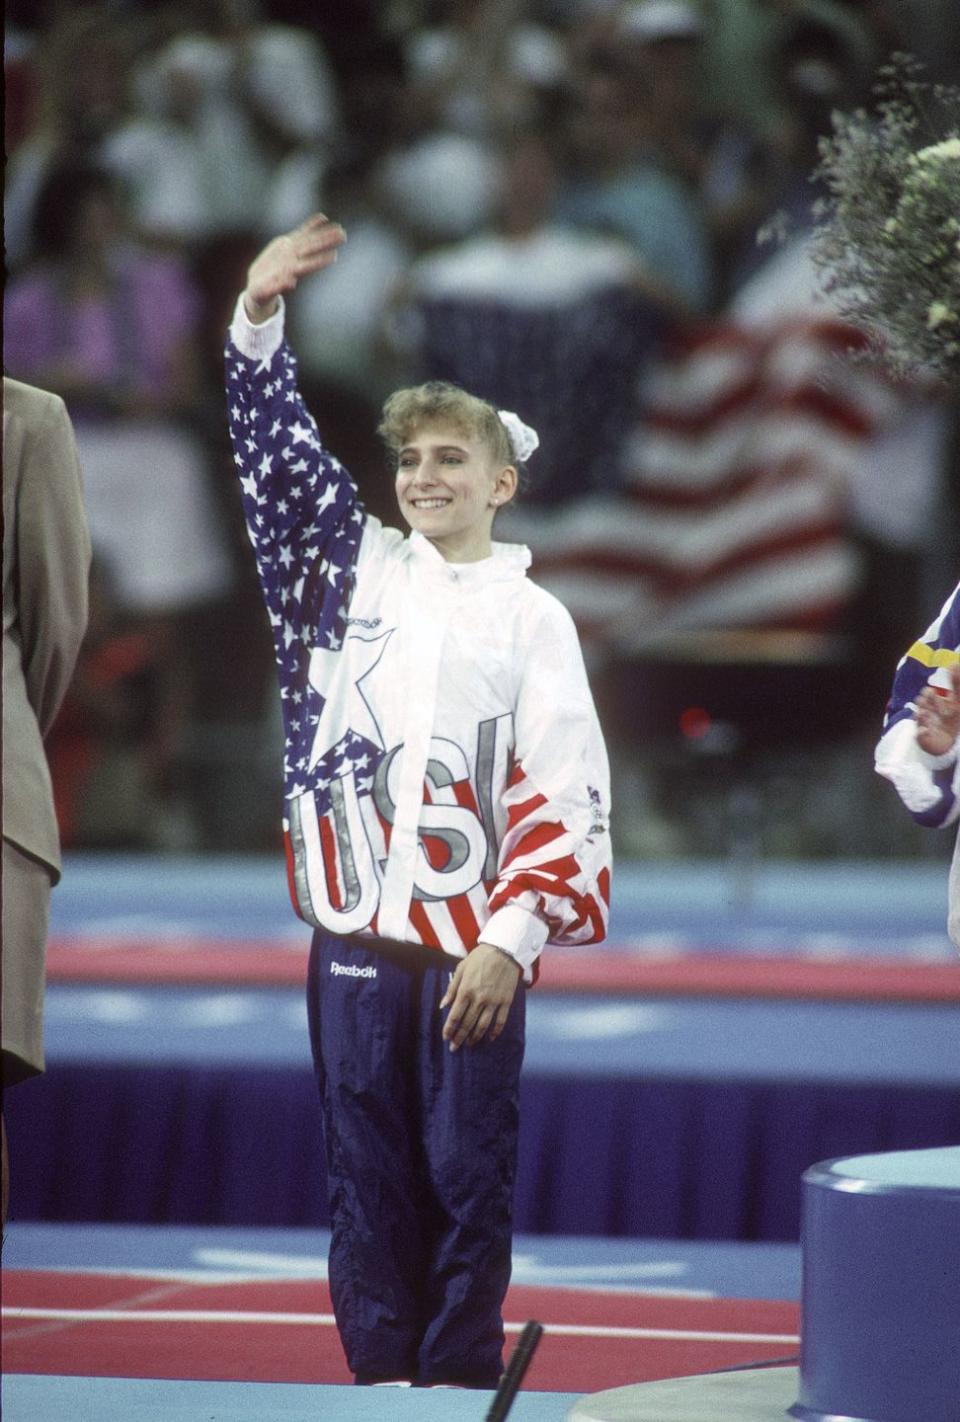 <p>Shannon Miller was an accomplished gymnast before her time on the 1996 Olympic team, known as the Magnificent Seven. Miller made her mark at the 1992 Olympic Games, taking home five medals total, which at the time was the most medals earned by any Olympic athlete in any sport. </p>